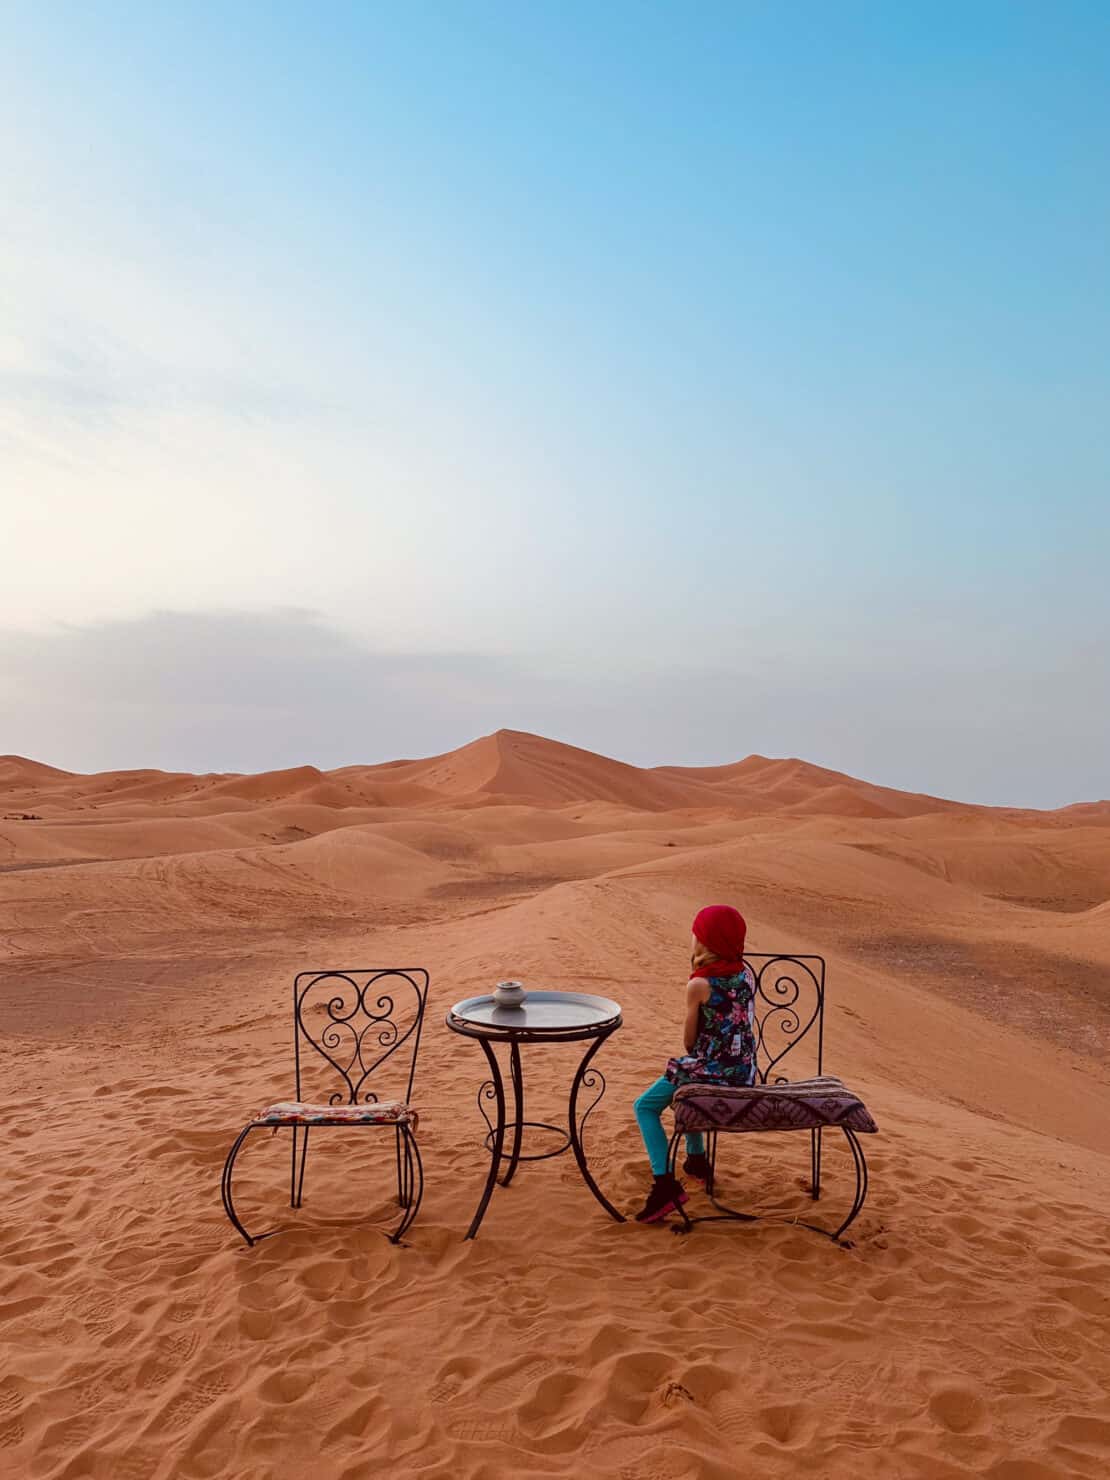 Child staring out at the sand dunes in Morocco